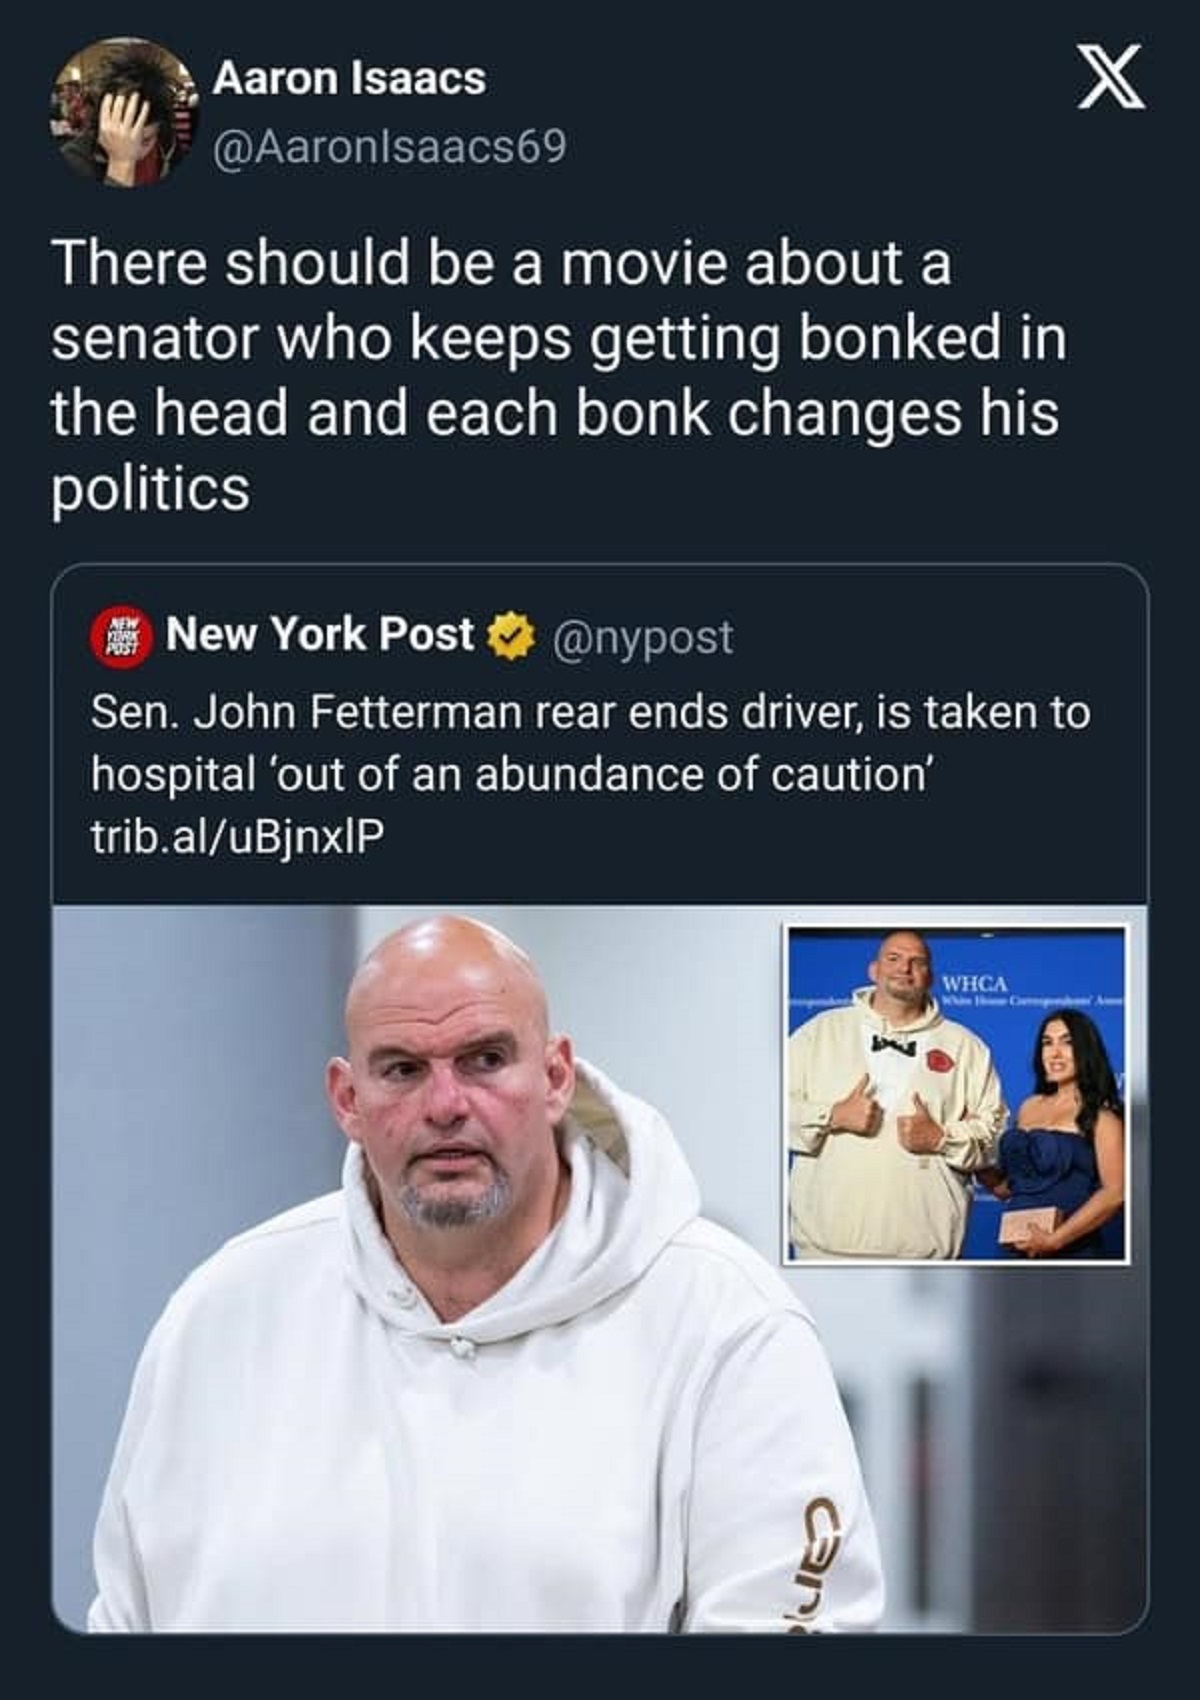 senior citizen - Aaron Isaacs There should be a movie about a senator who keeps getting bonked in the head and each bonk changes his politics New York Post Sen. John Fetterman rear ends driver, is taken to hospital 'out of an abundance of caution' trib.al